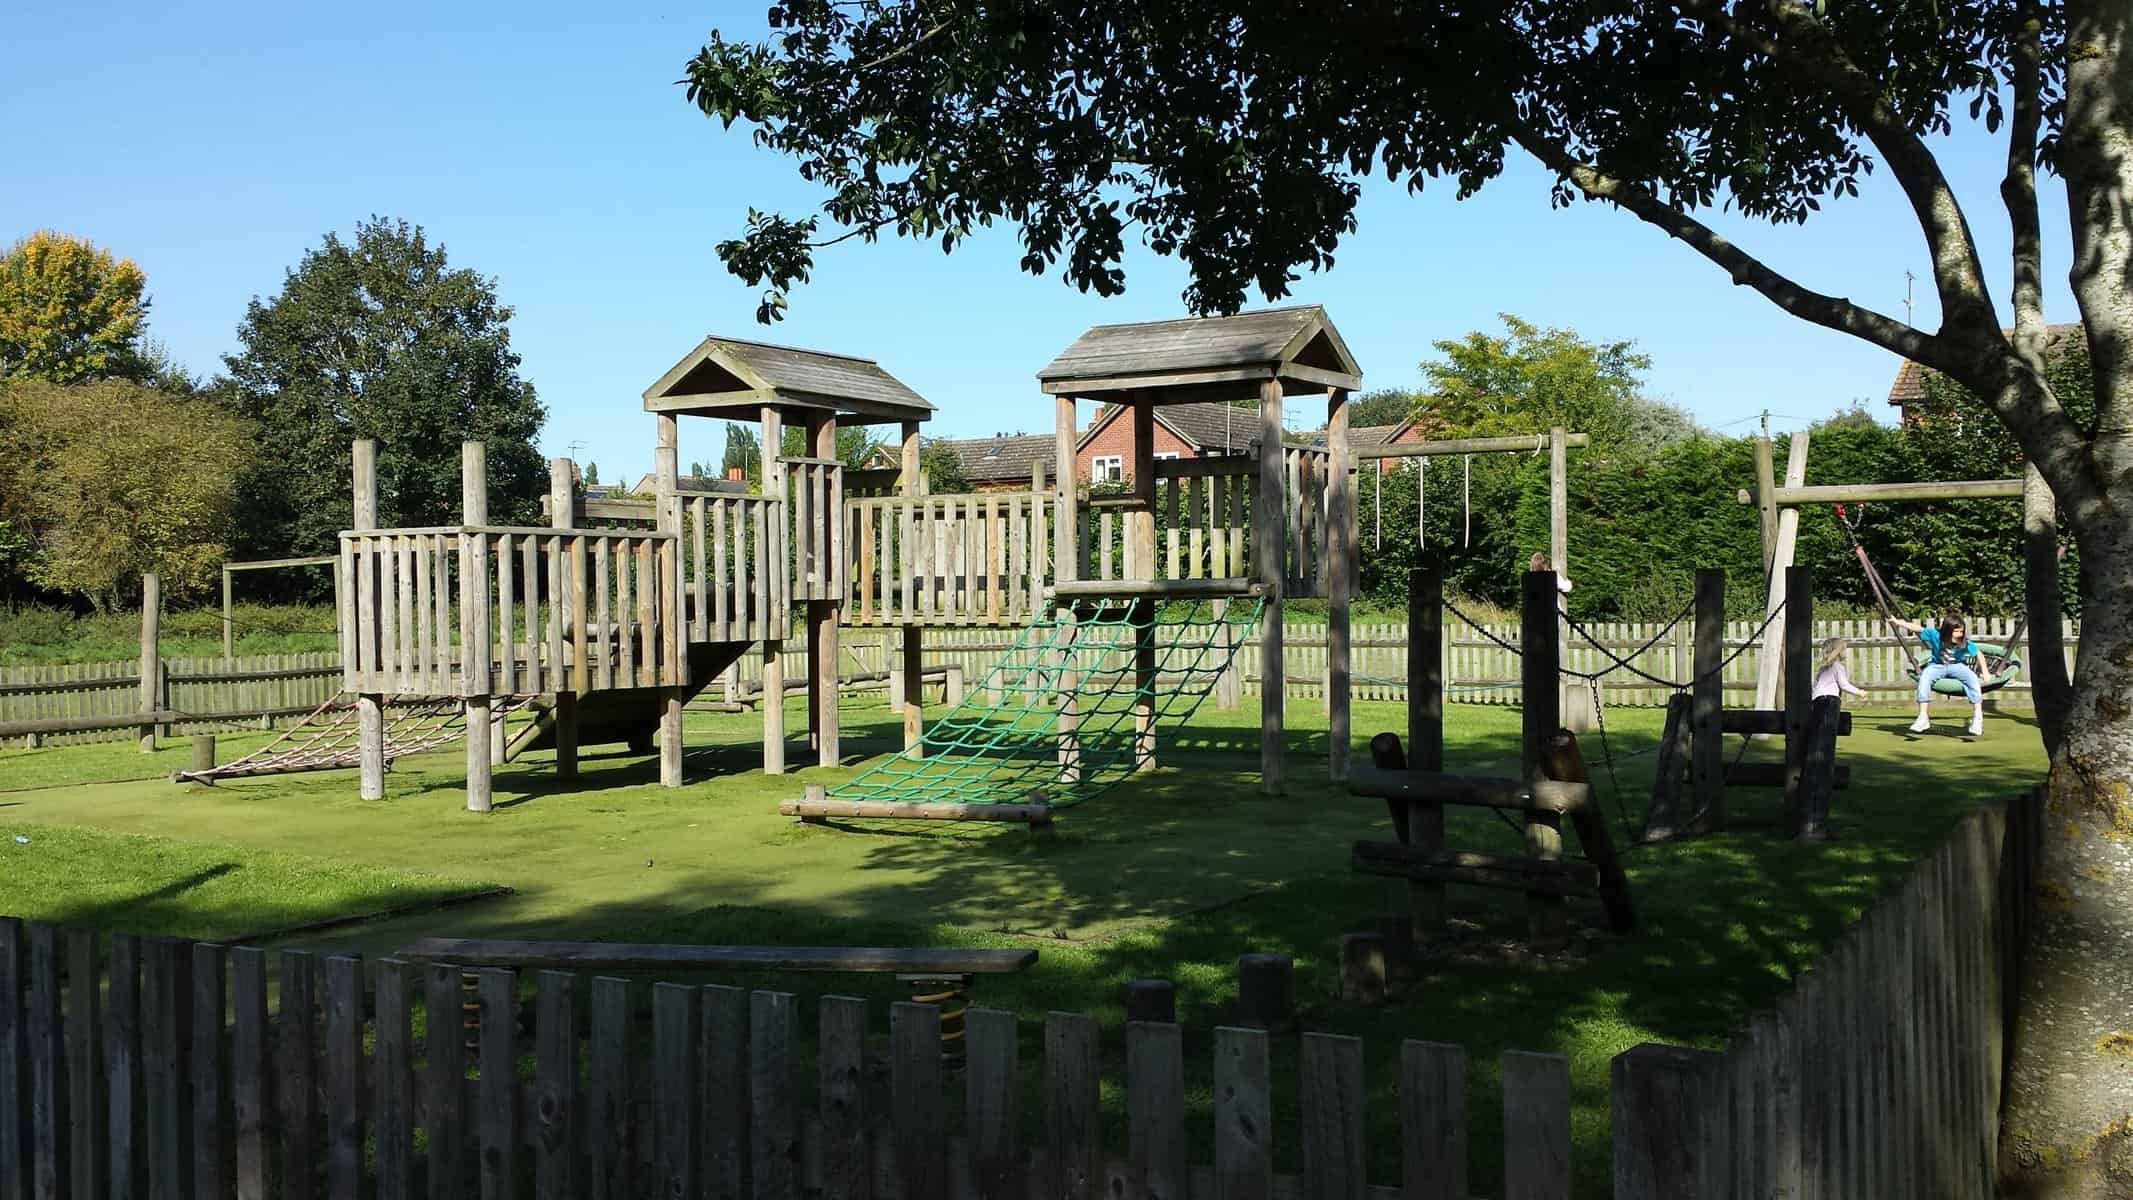 King's Meadow play area